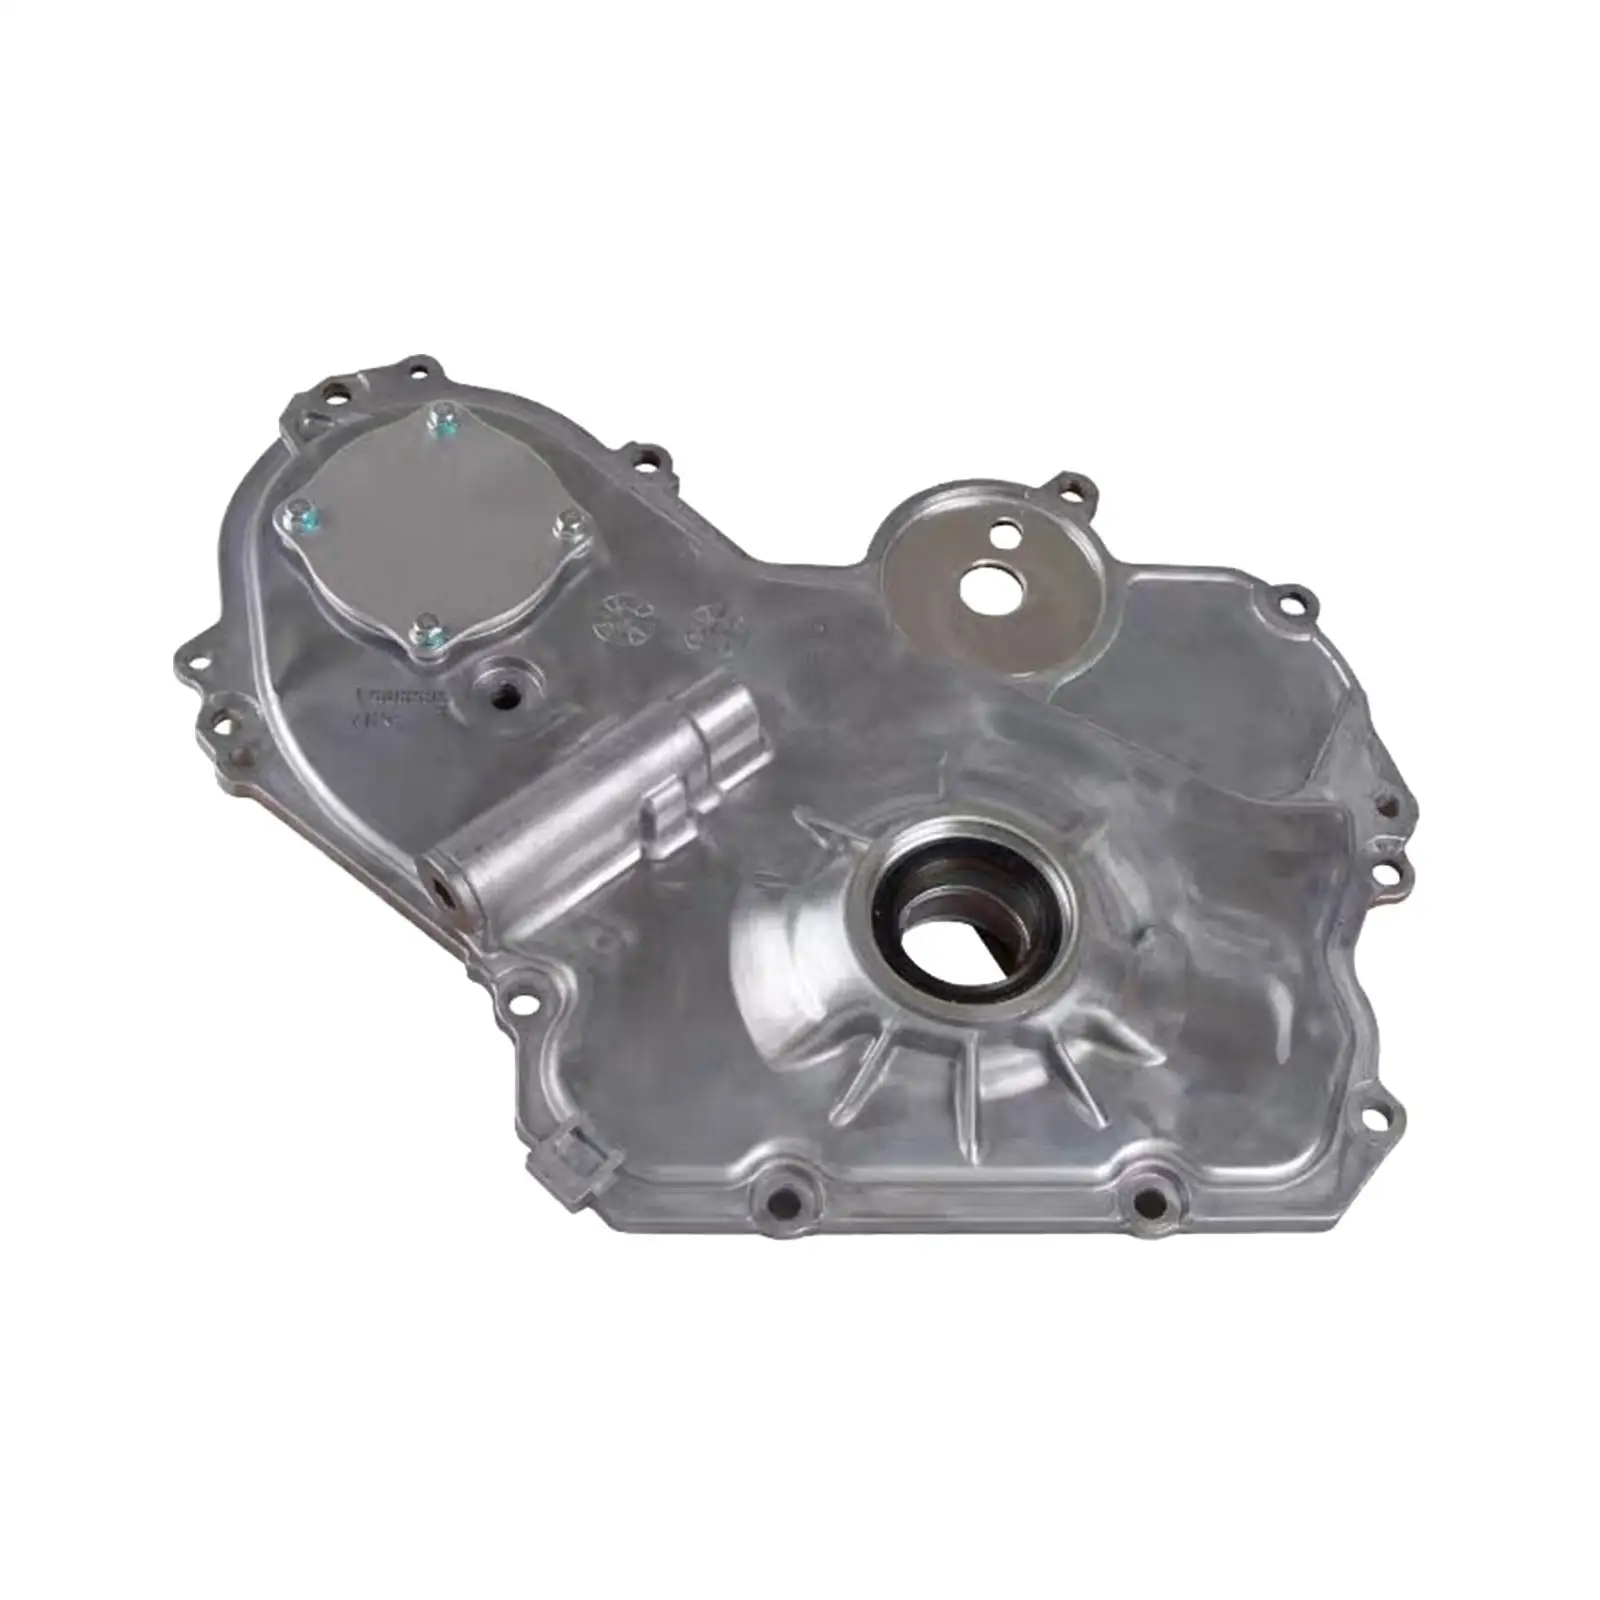 Timing Cover with Oil Pump for Chevrolet Cobalt HHR Impala Malibu